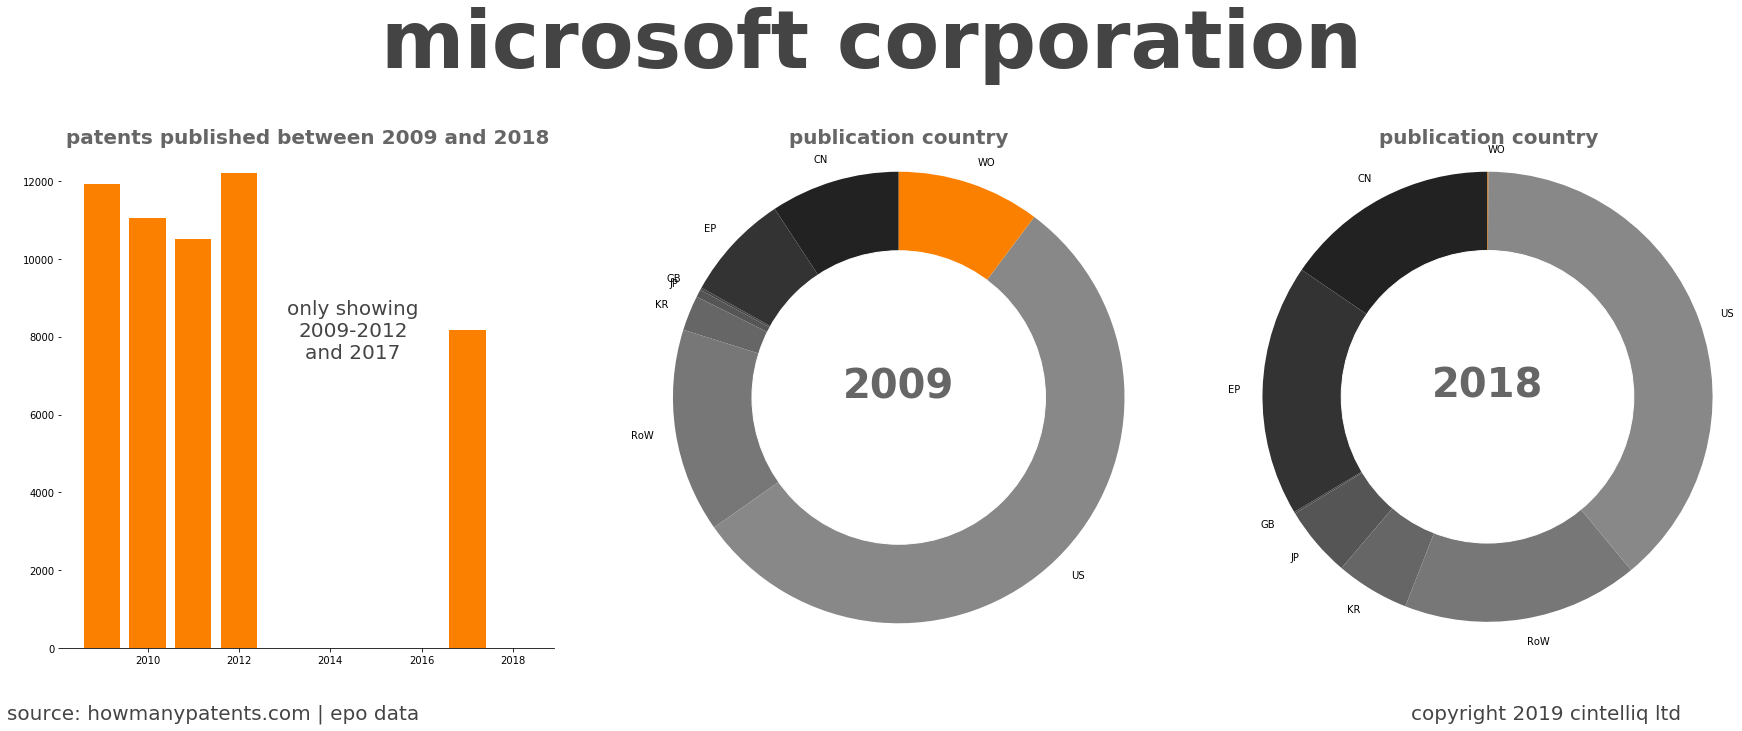 summary of patents for Microsoft Corporation